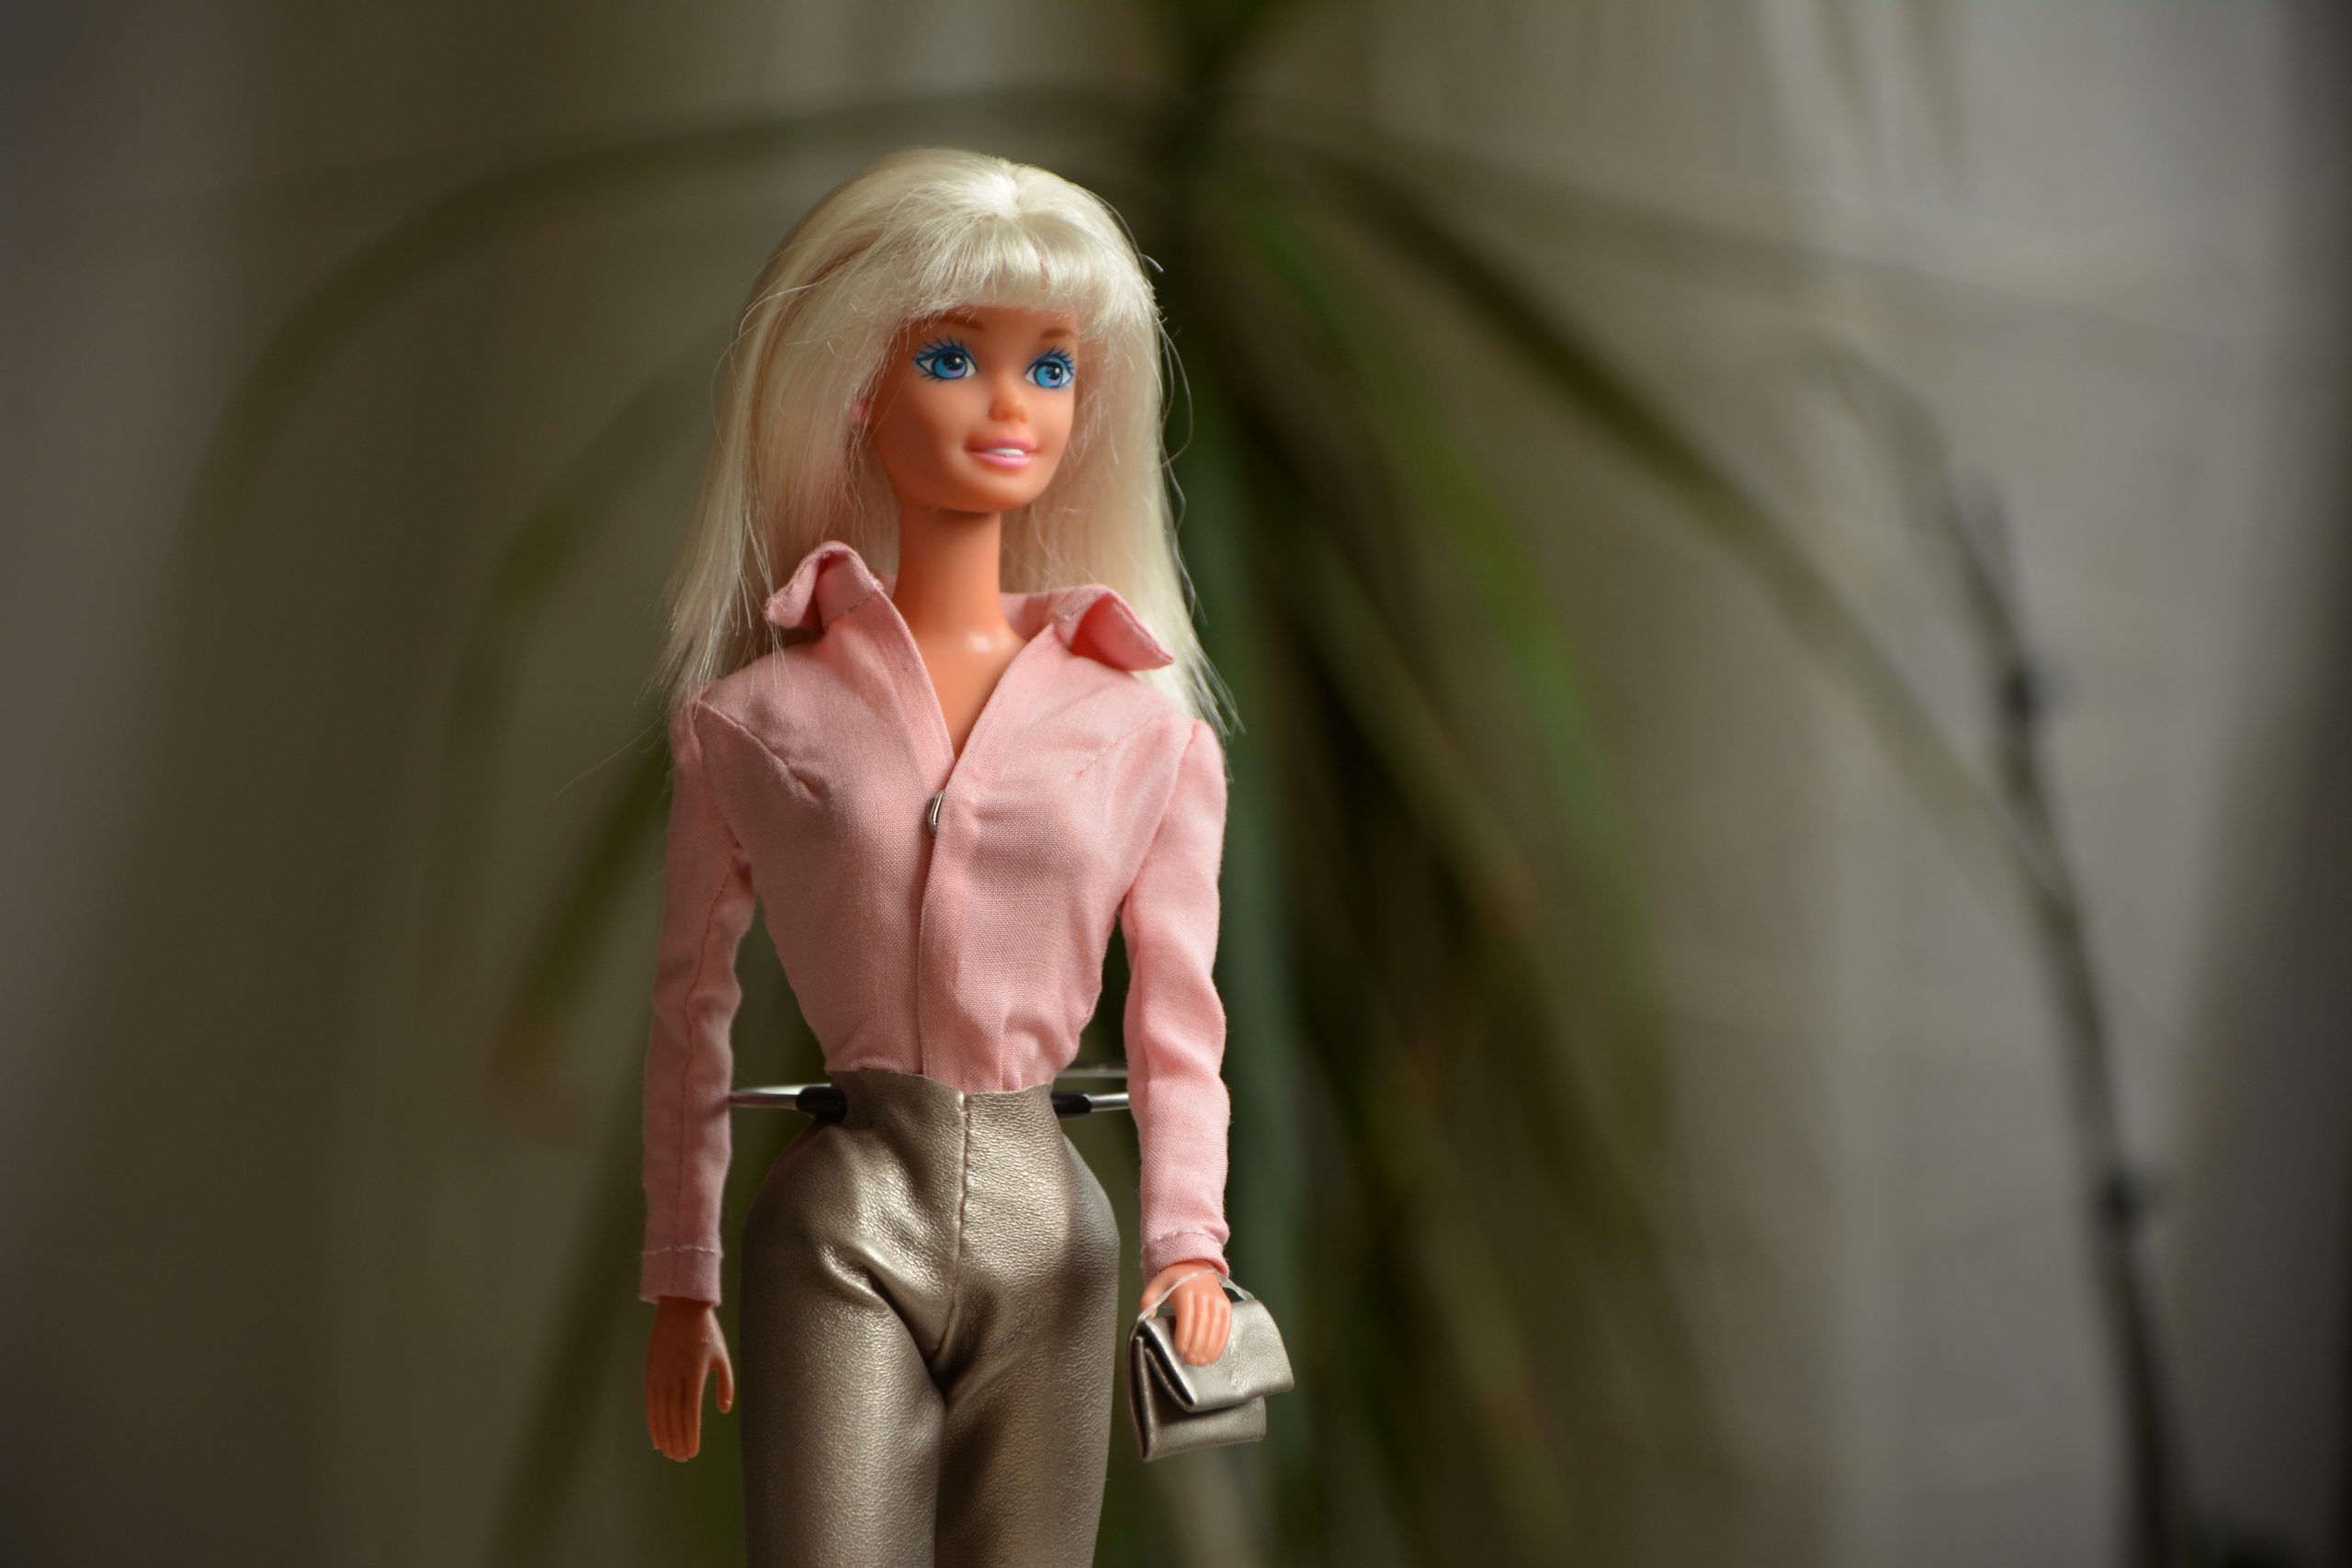 Hi BARBIE, Come On, Let's Go…Play Candy Crush®! BARBIE® and Candy